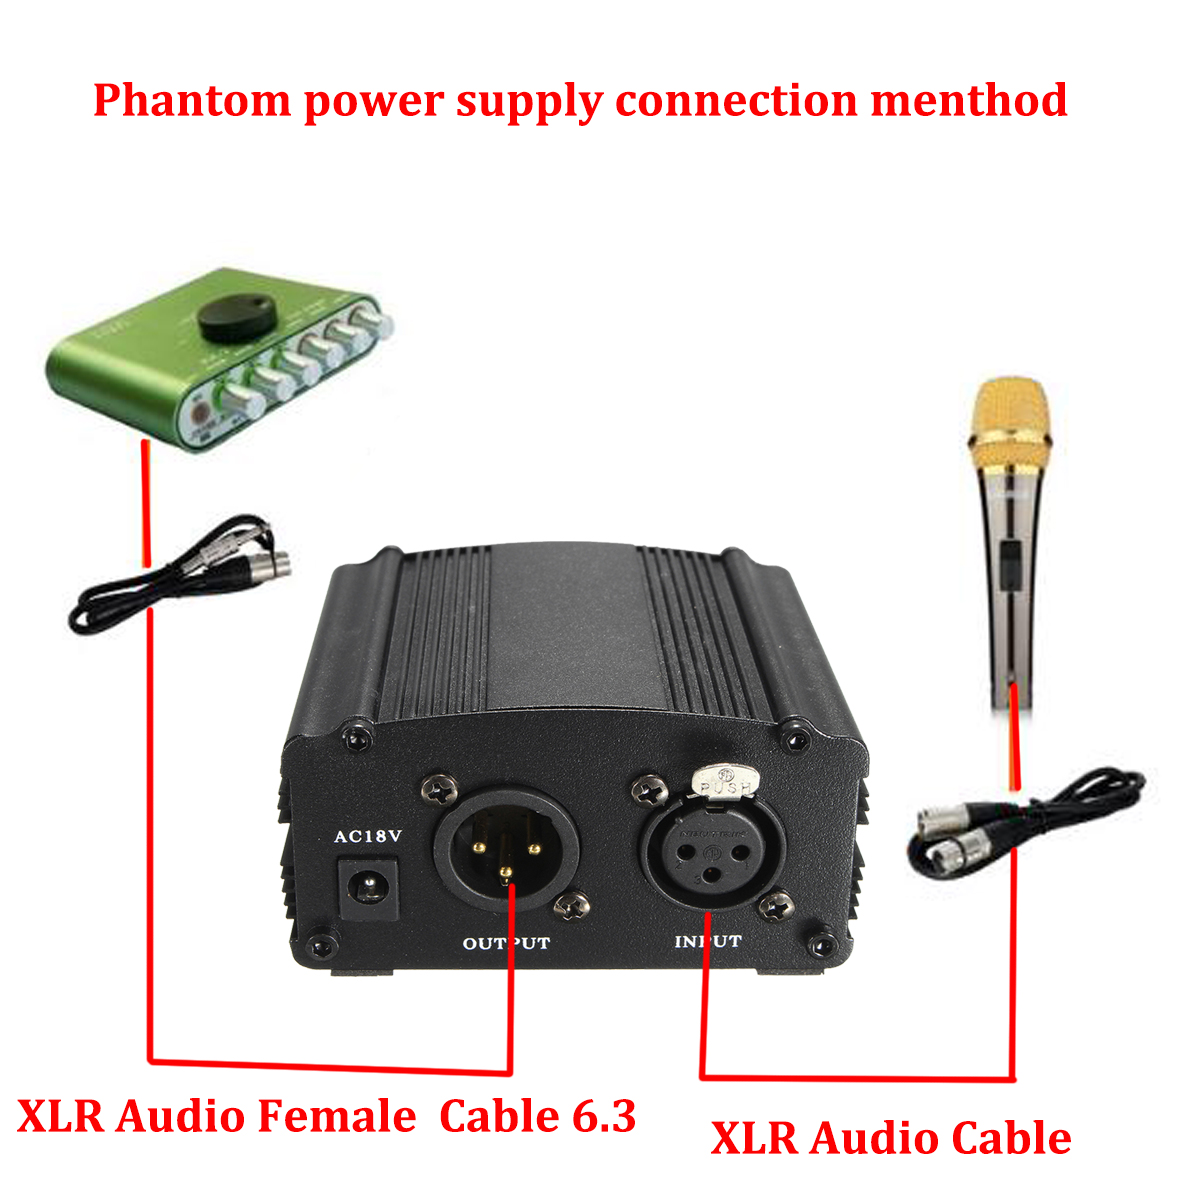 1-CH-DC-48V-Phantom-Power-Supply-with-Adapter-For-Condenser-Microphone-MIC-1148023